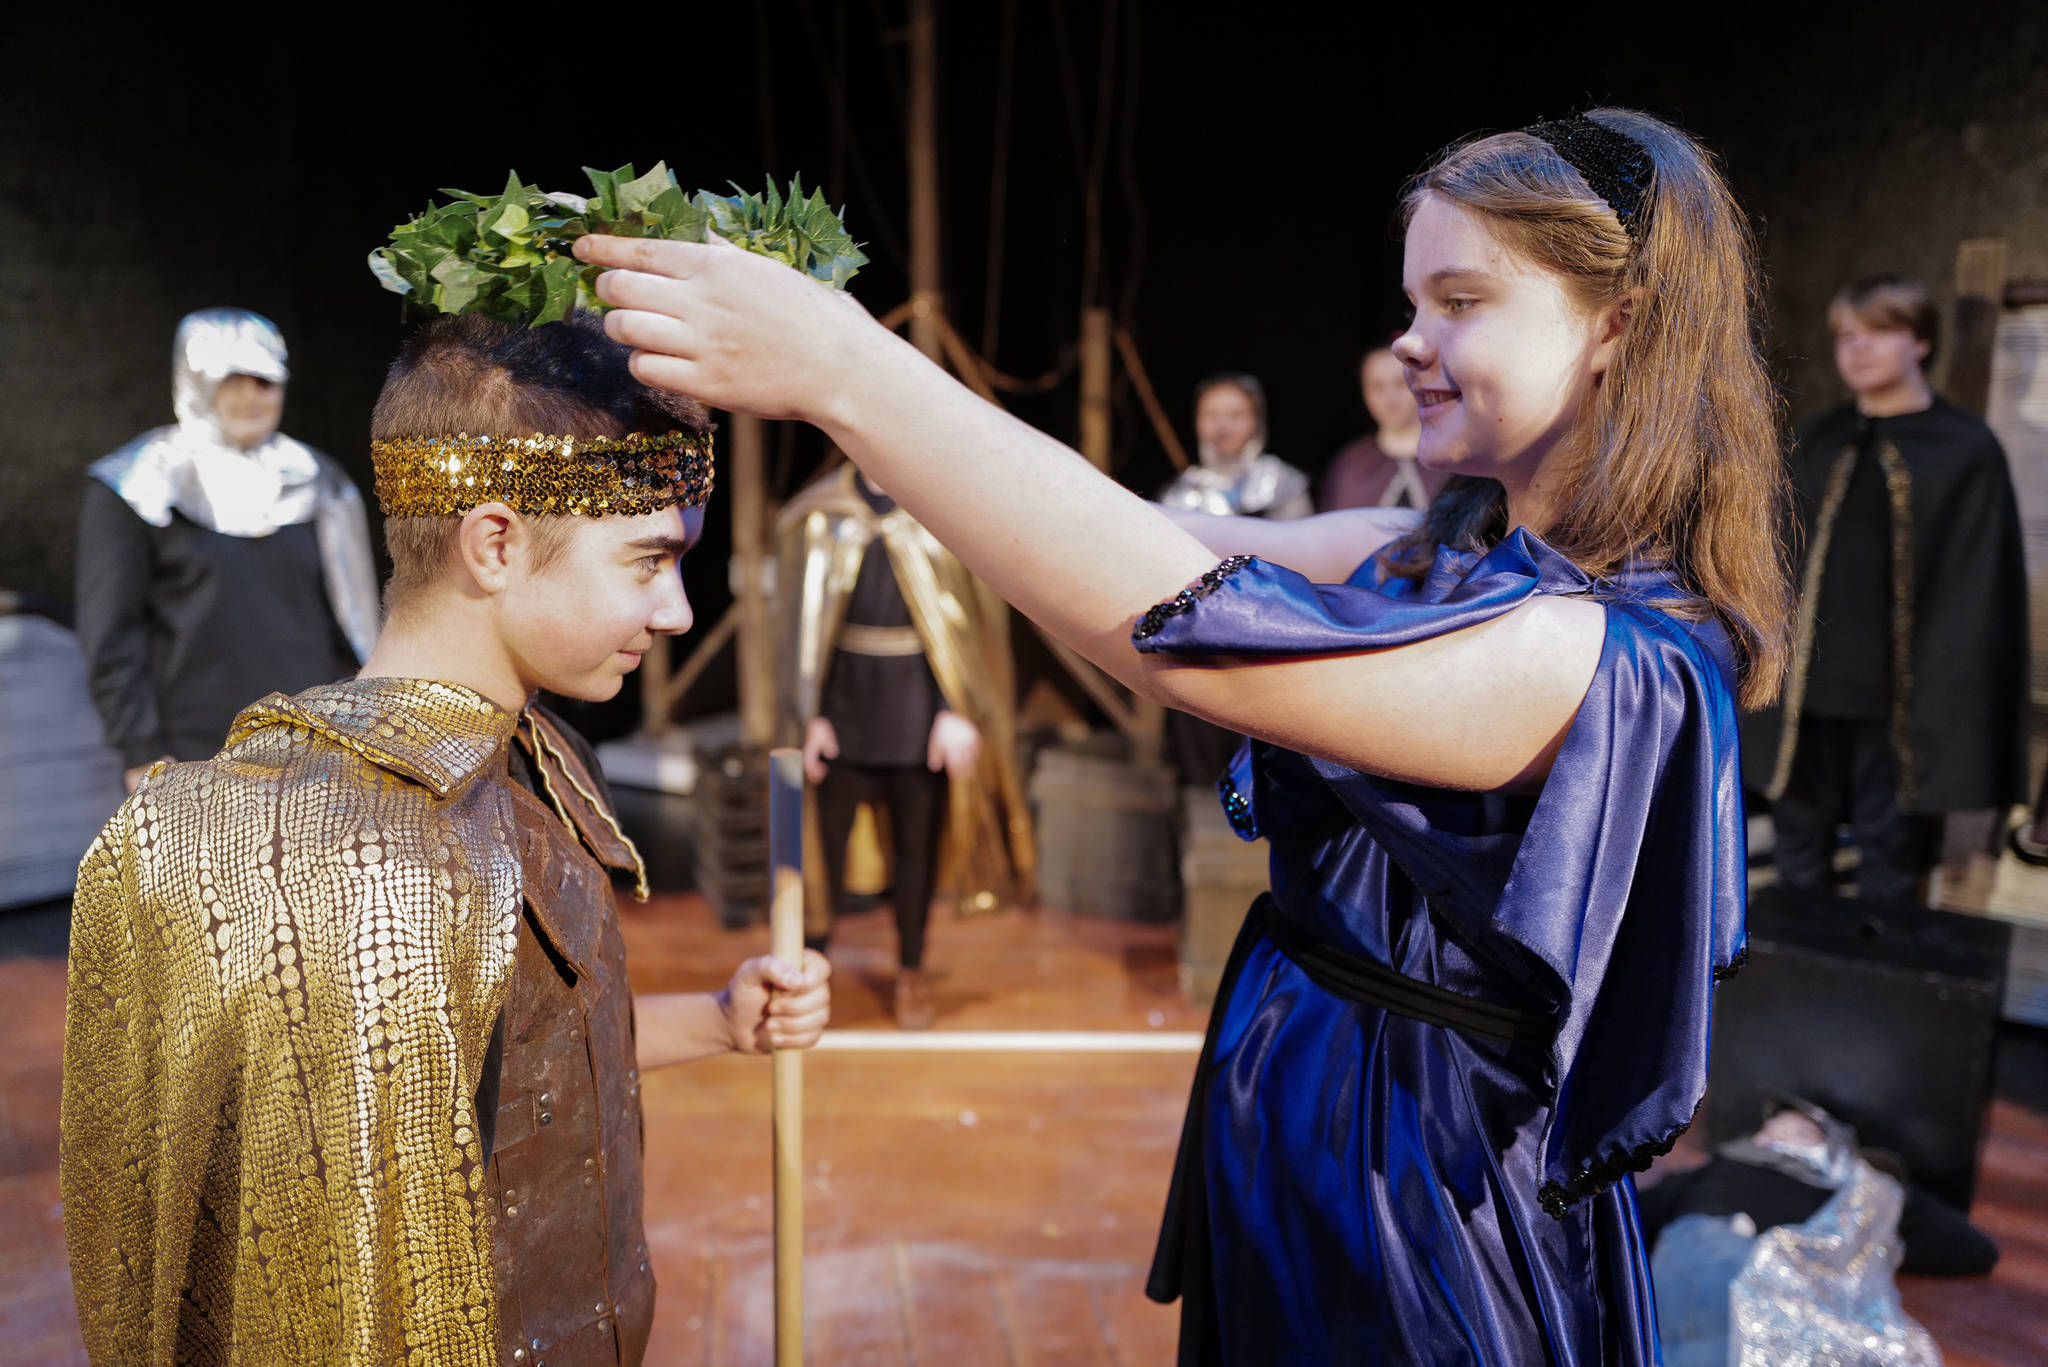 Seth Coppens, left, as a triumphant Pericles, and Kat Shelton, as Princess Thaisa, rehearse in Perseverance Theatre’s STAR production of “Pericles 2216: The Intergalactic Adventures of the Prince of Tyre” on Tuesday, July 16, 2019. (Michael Penn | Juneau Empire)